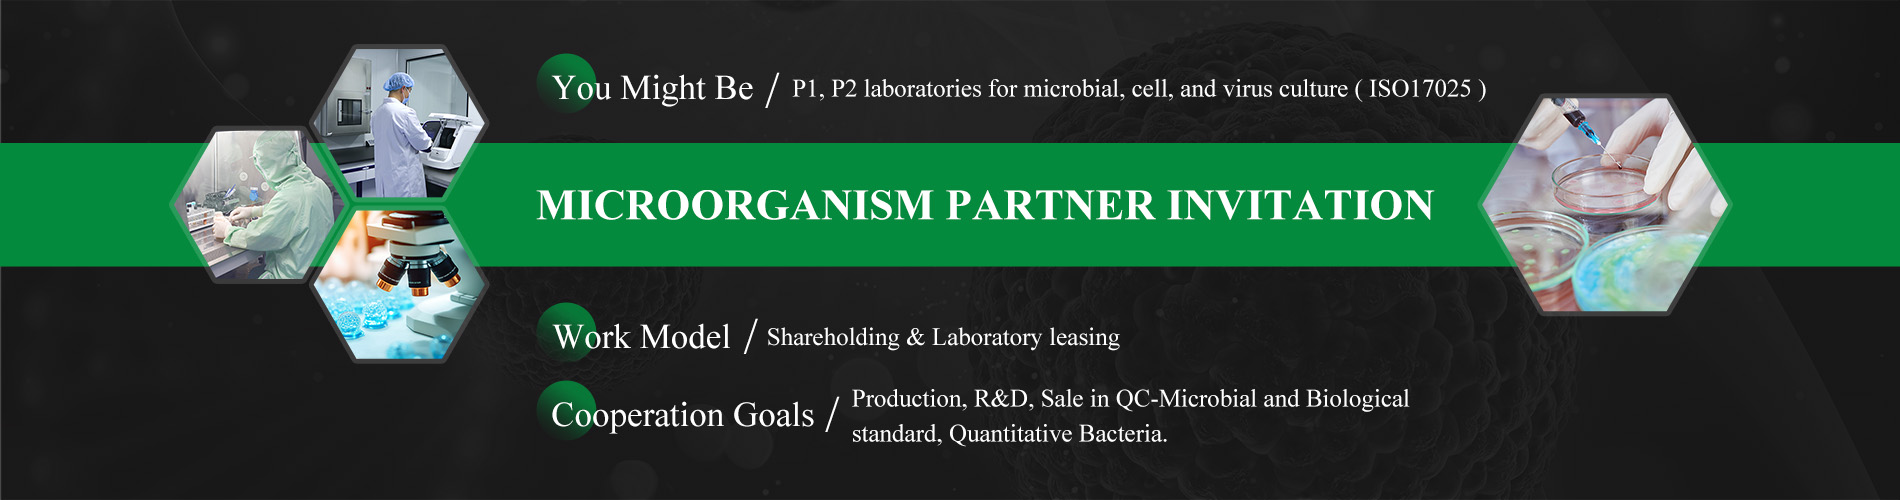 Seeking Global Laboratory Partners: Join Us in Advancing Microbial Research and Development